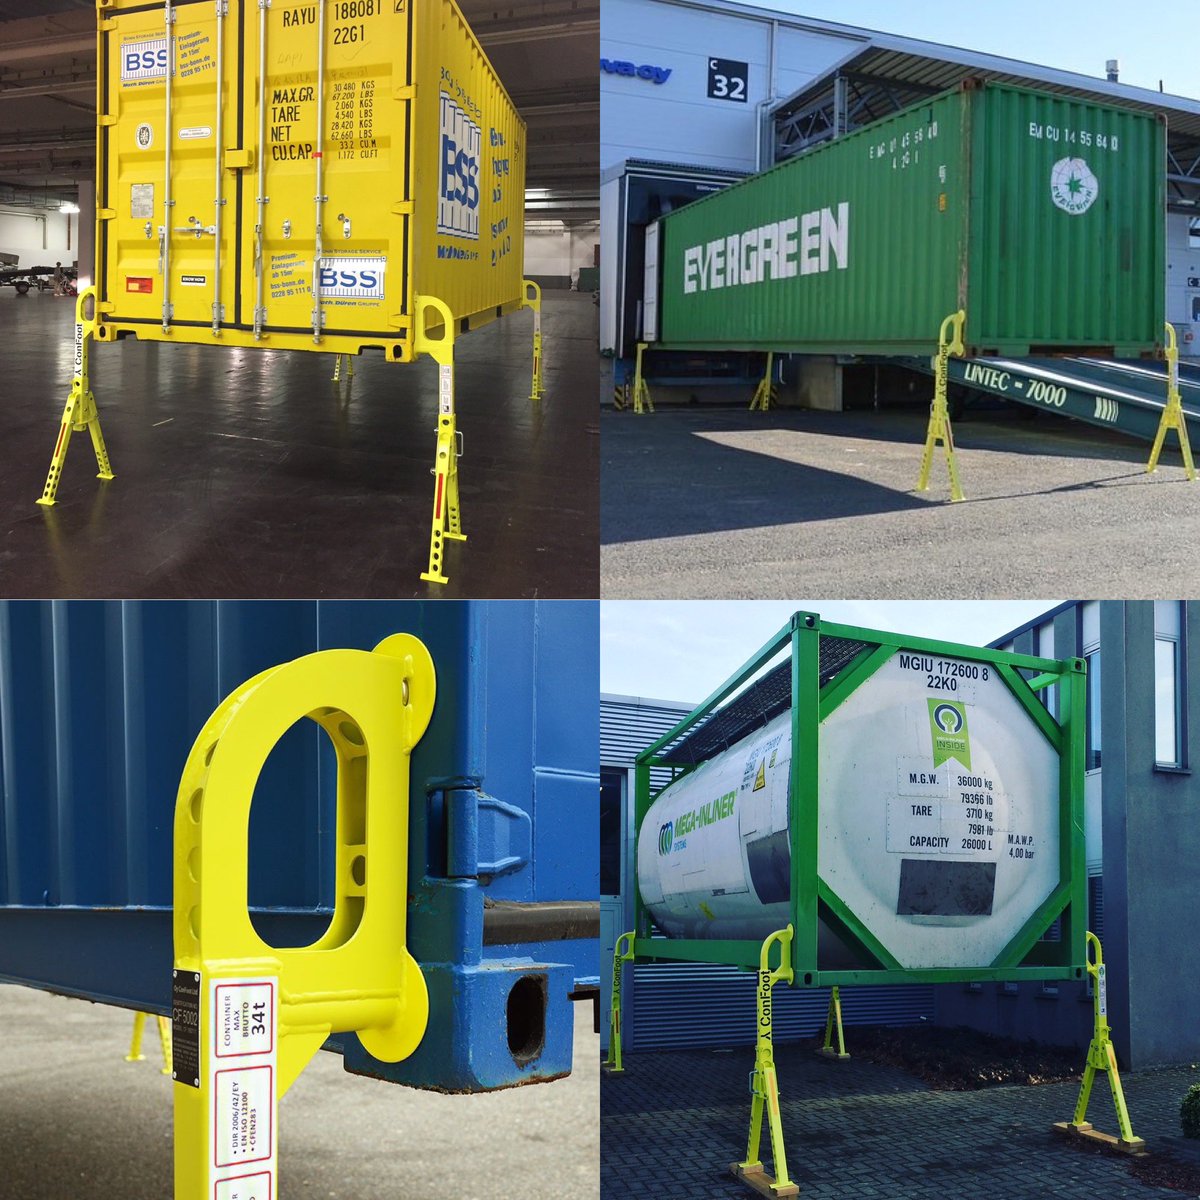 @robcostongs is visiting @IntermodalEU on Wednesday 11 October 
Let’s meet to discuss how one person can un/load containers in an easy, safe and cost effective way without expensive equipment. #confoot #containerlegs @confoot_EN @dominoclamps @LiftPointPro